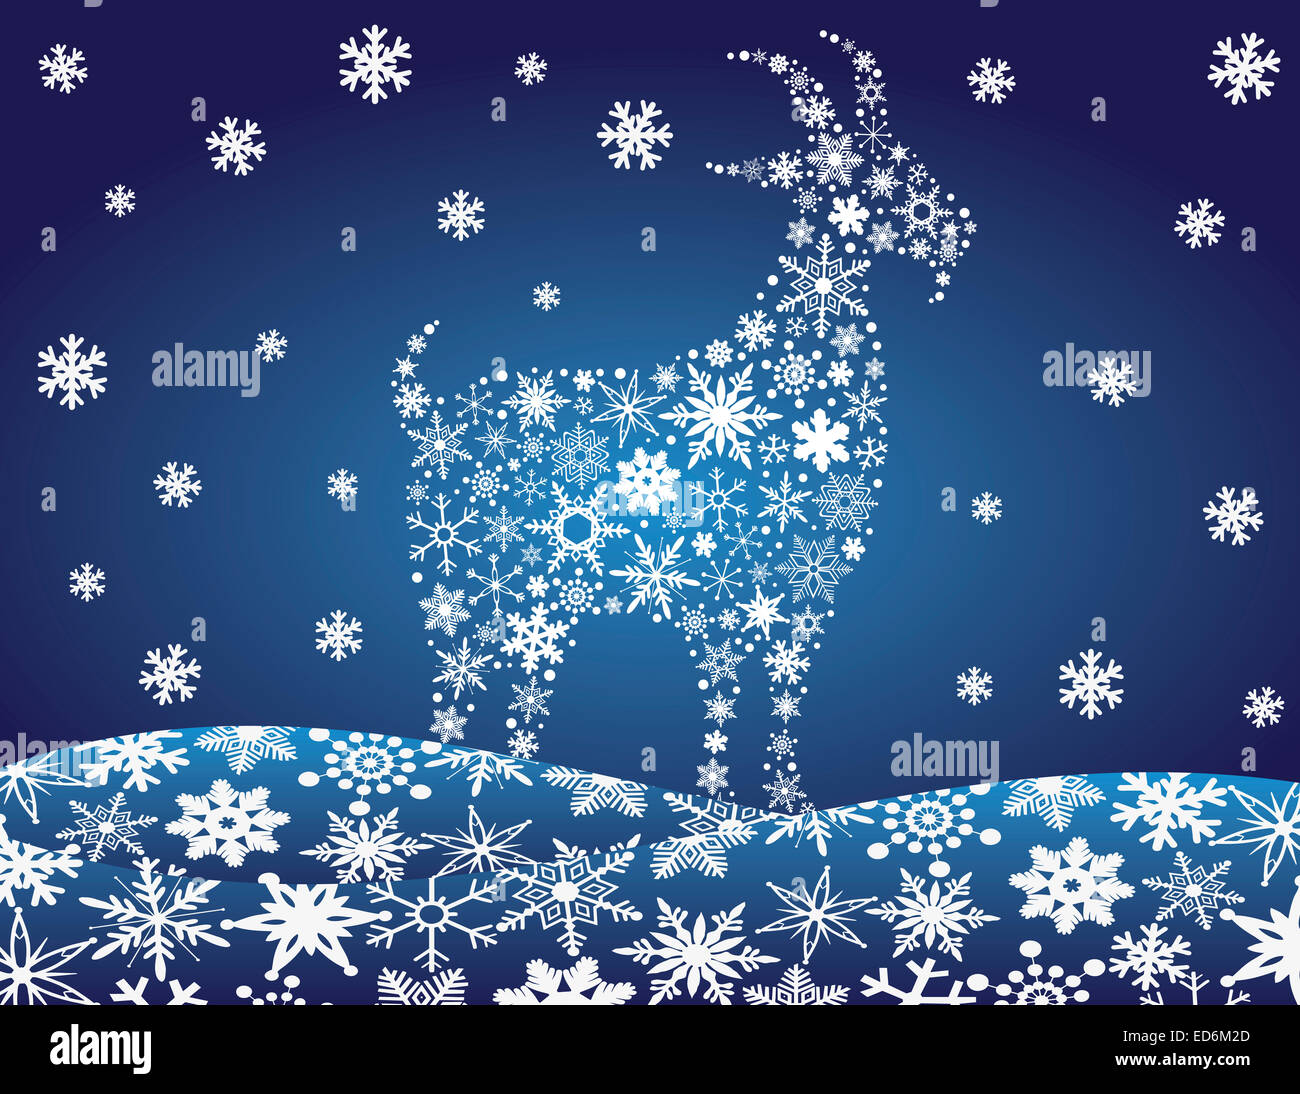 2014 Chinese Lunar New Year of the Goat Silhouette with Snowflakes Pattern on Night Winter Snow Scene Background Illustration Stock Photo